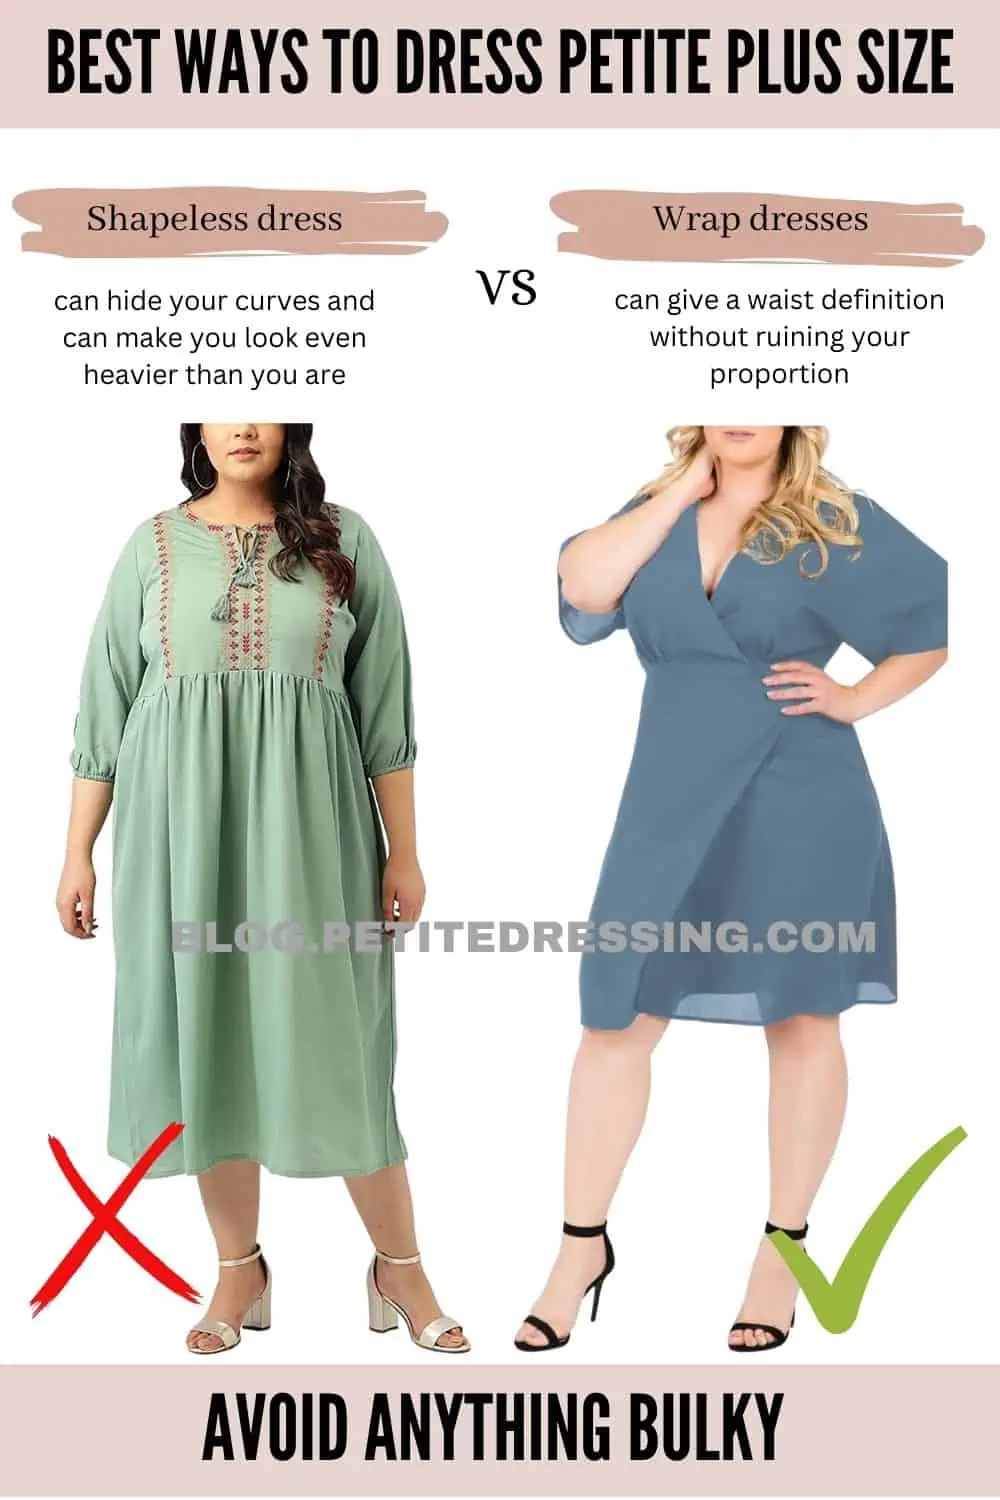 16 Best Ways to Dress Petite Plus Size - Petite Dressing  Dress for chubby  ladies, Plus size outfits, Plus size fashion tips